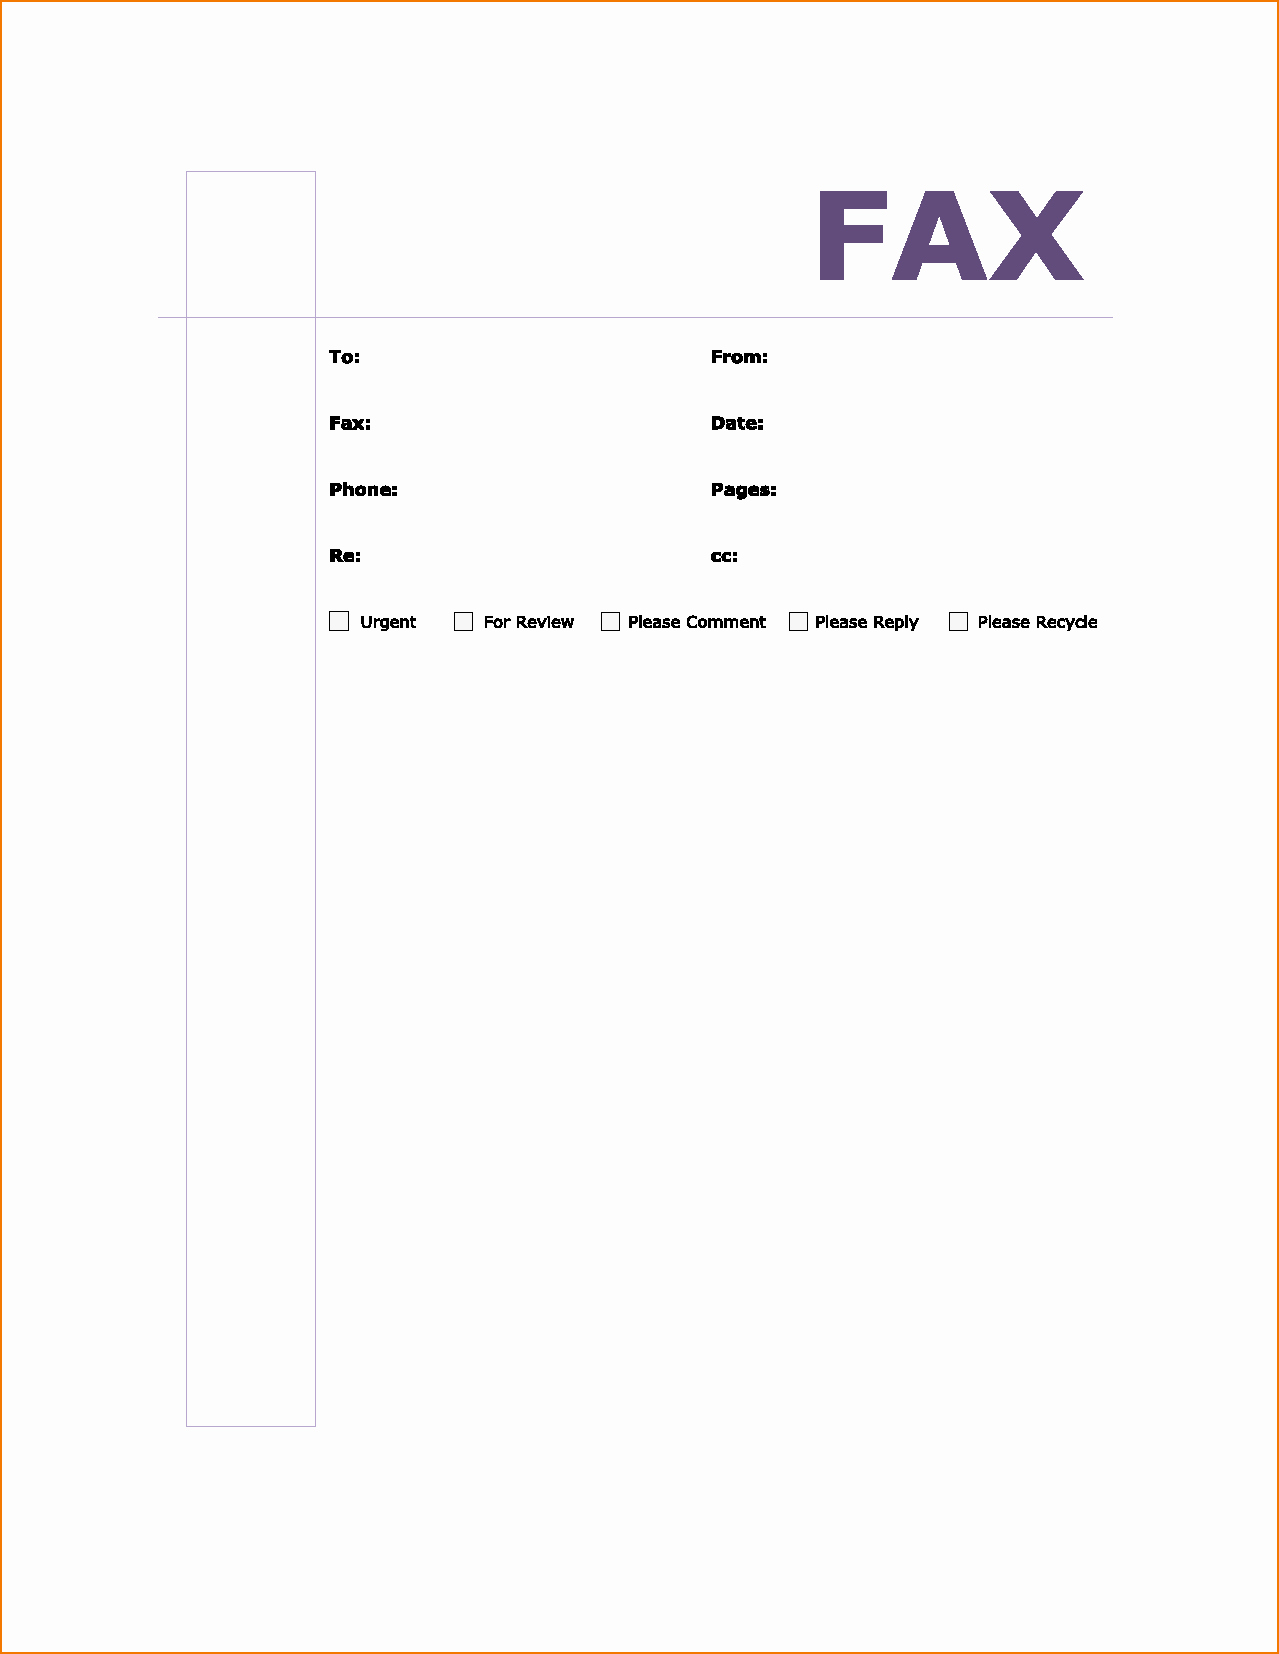 Sample Of Fax Cover Sheet Beautiful Fax